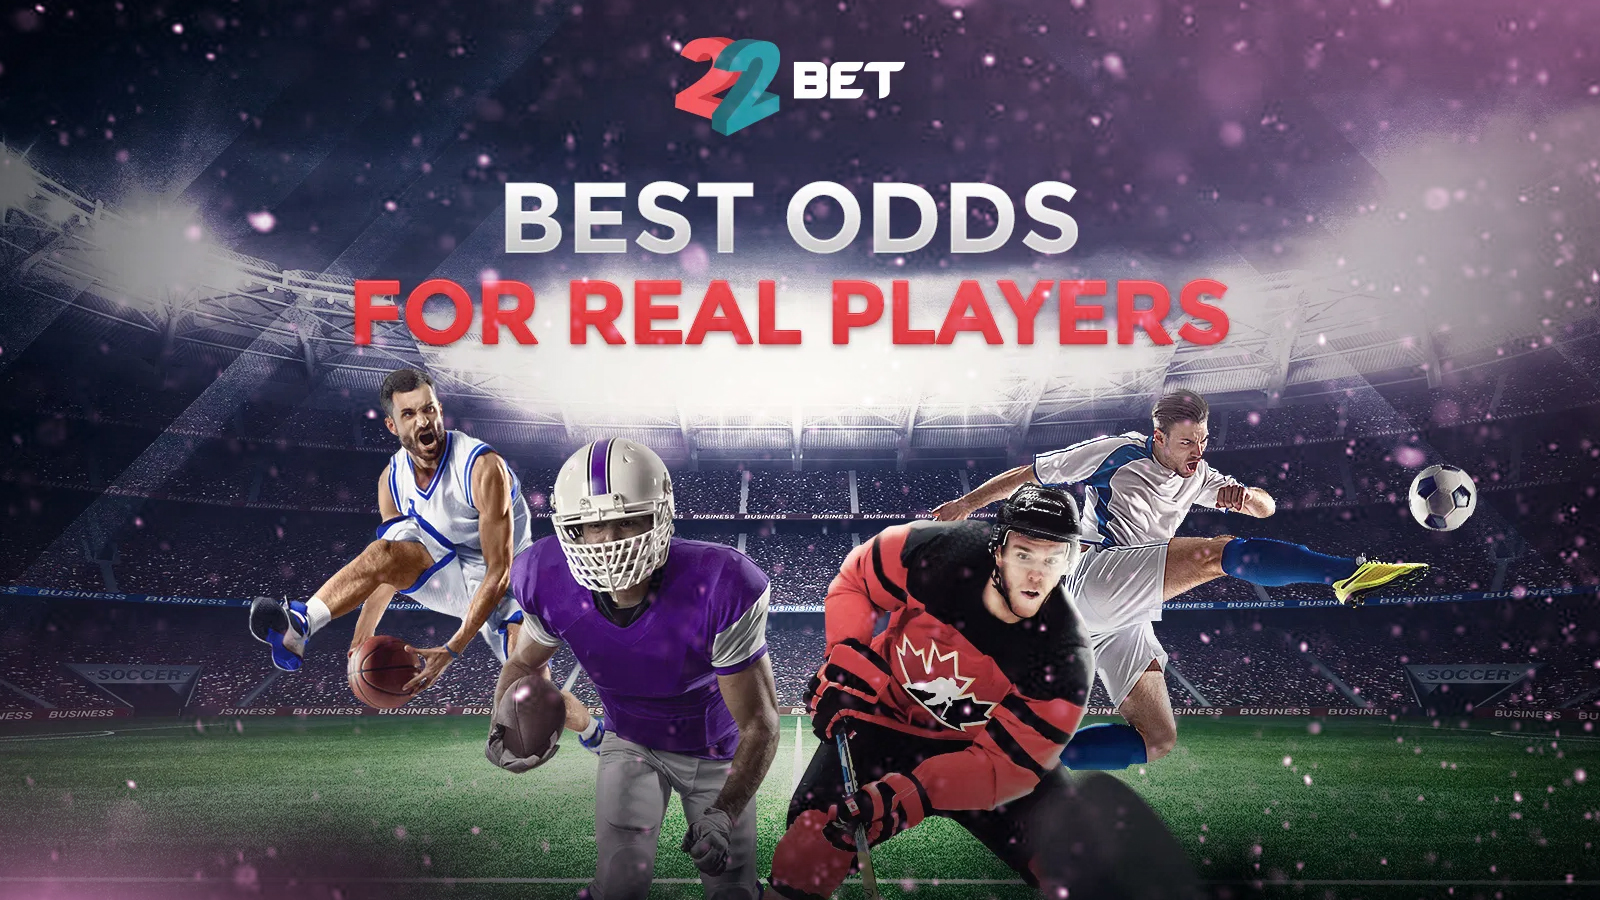 If you a re tired of casino games you can place bets on different sports at 22bet.